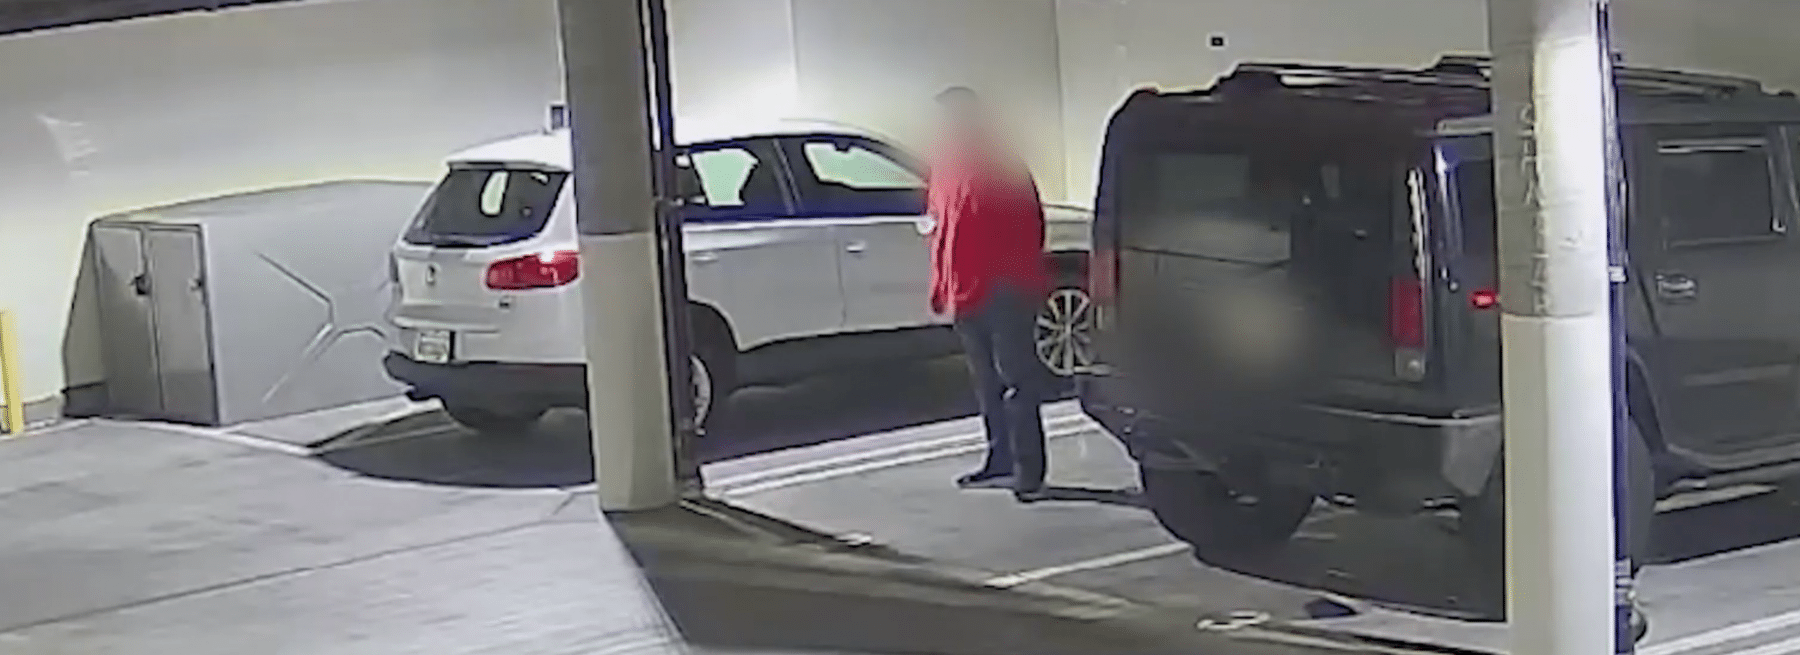 Three Car Prowlers Caught in California Parking Garage